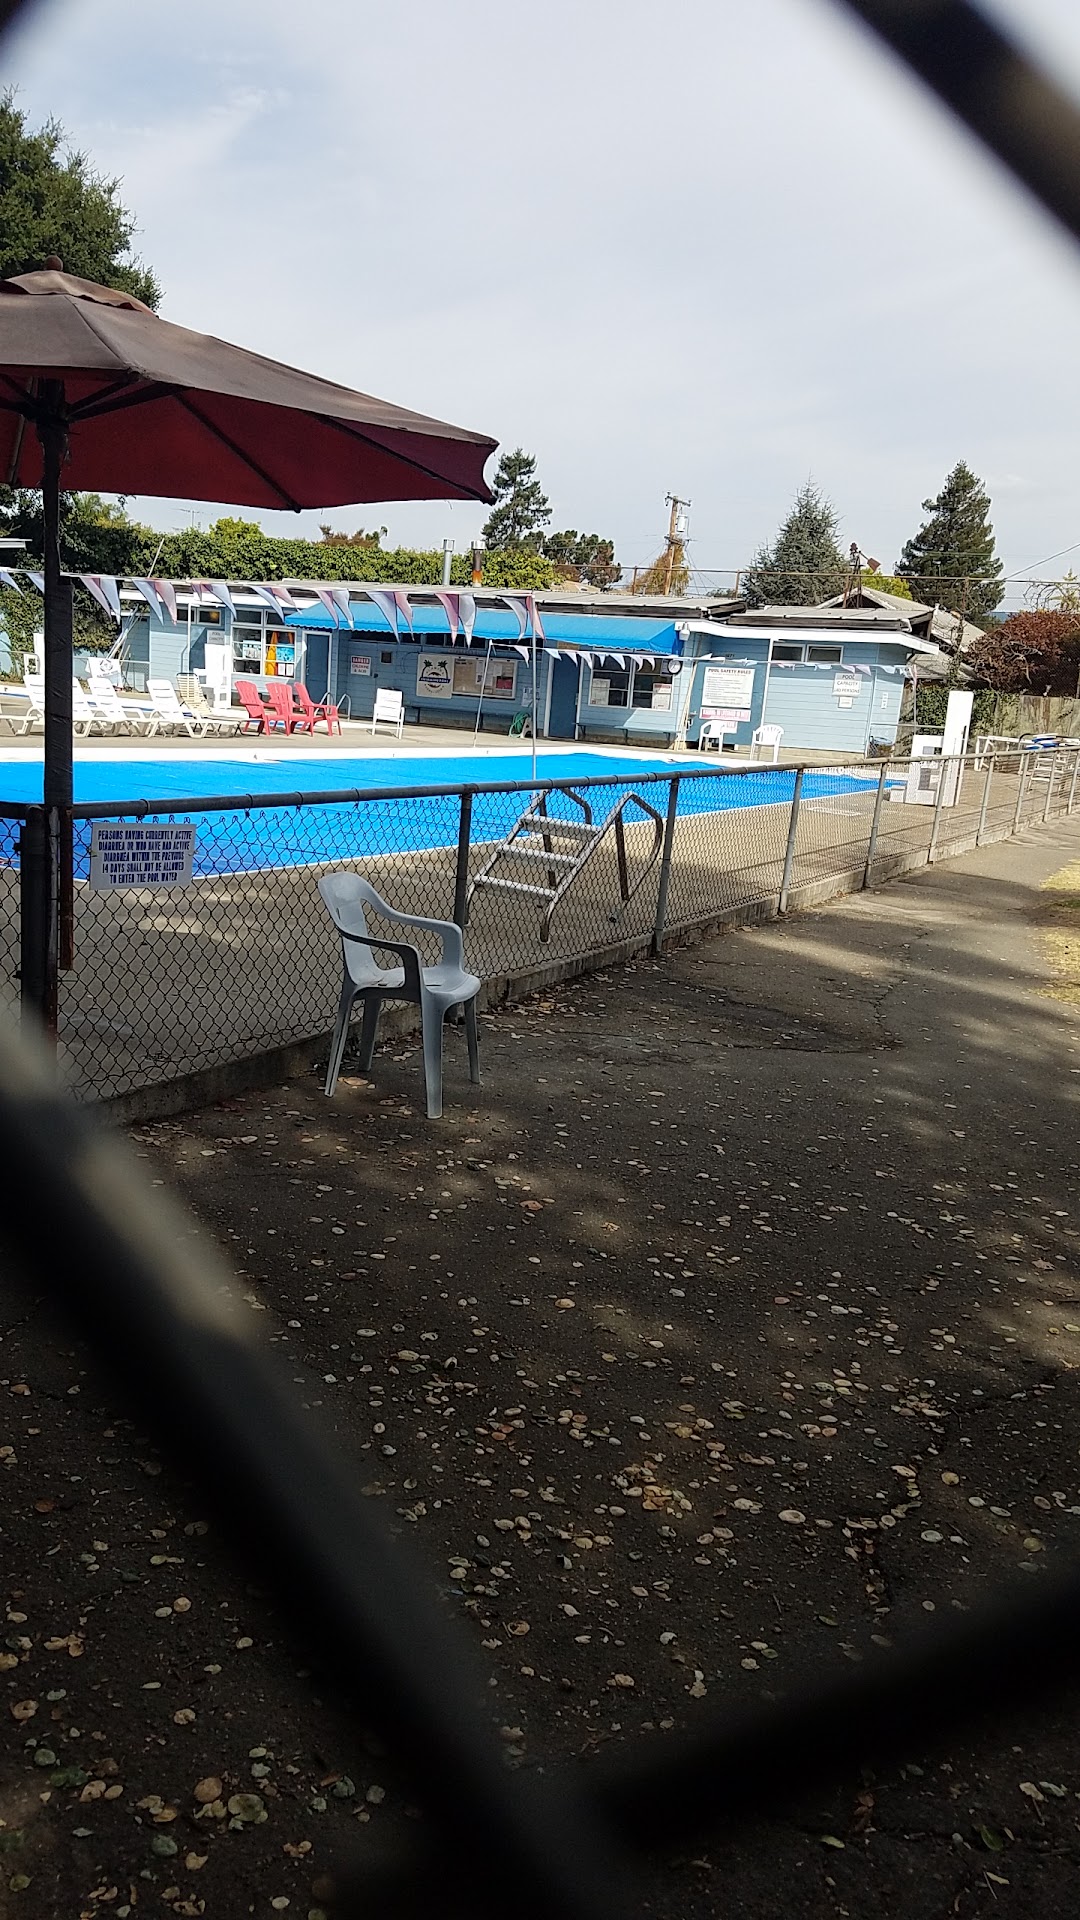 Lincoln Park Pool